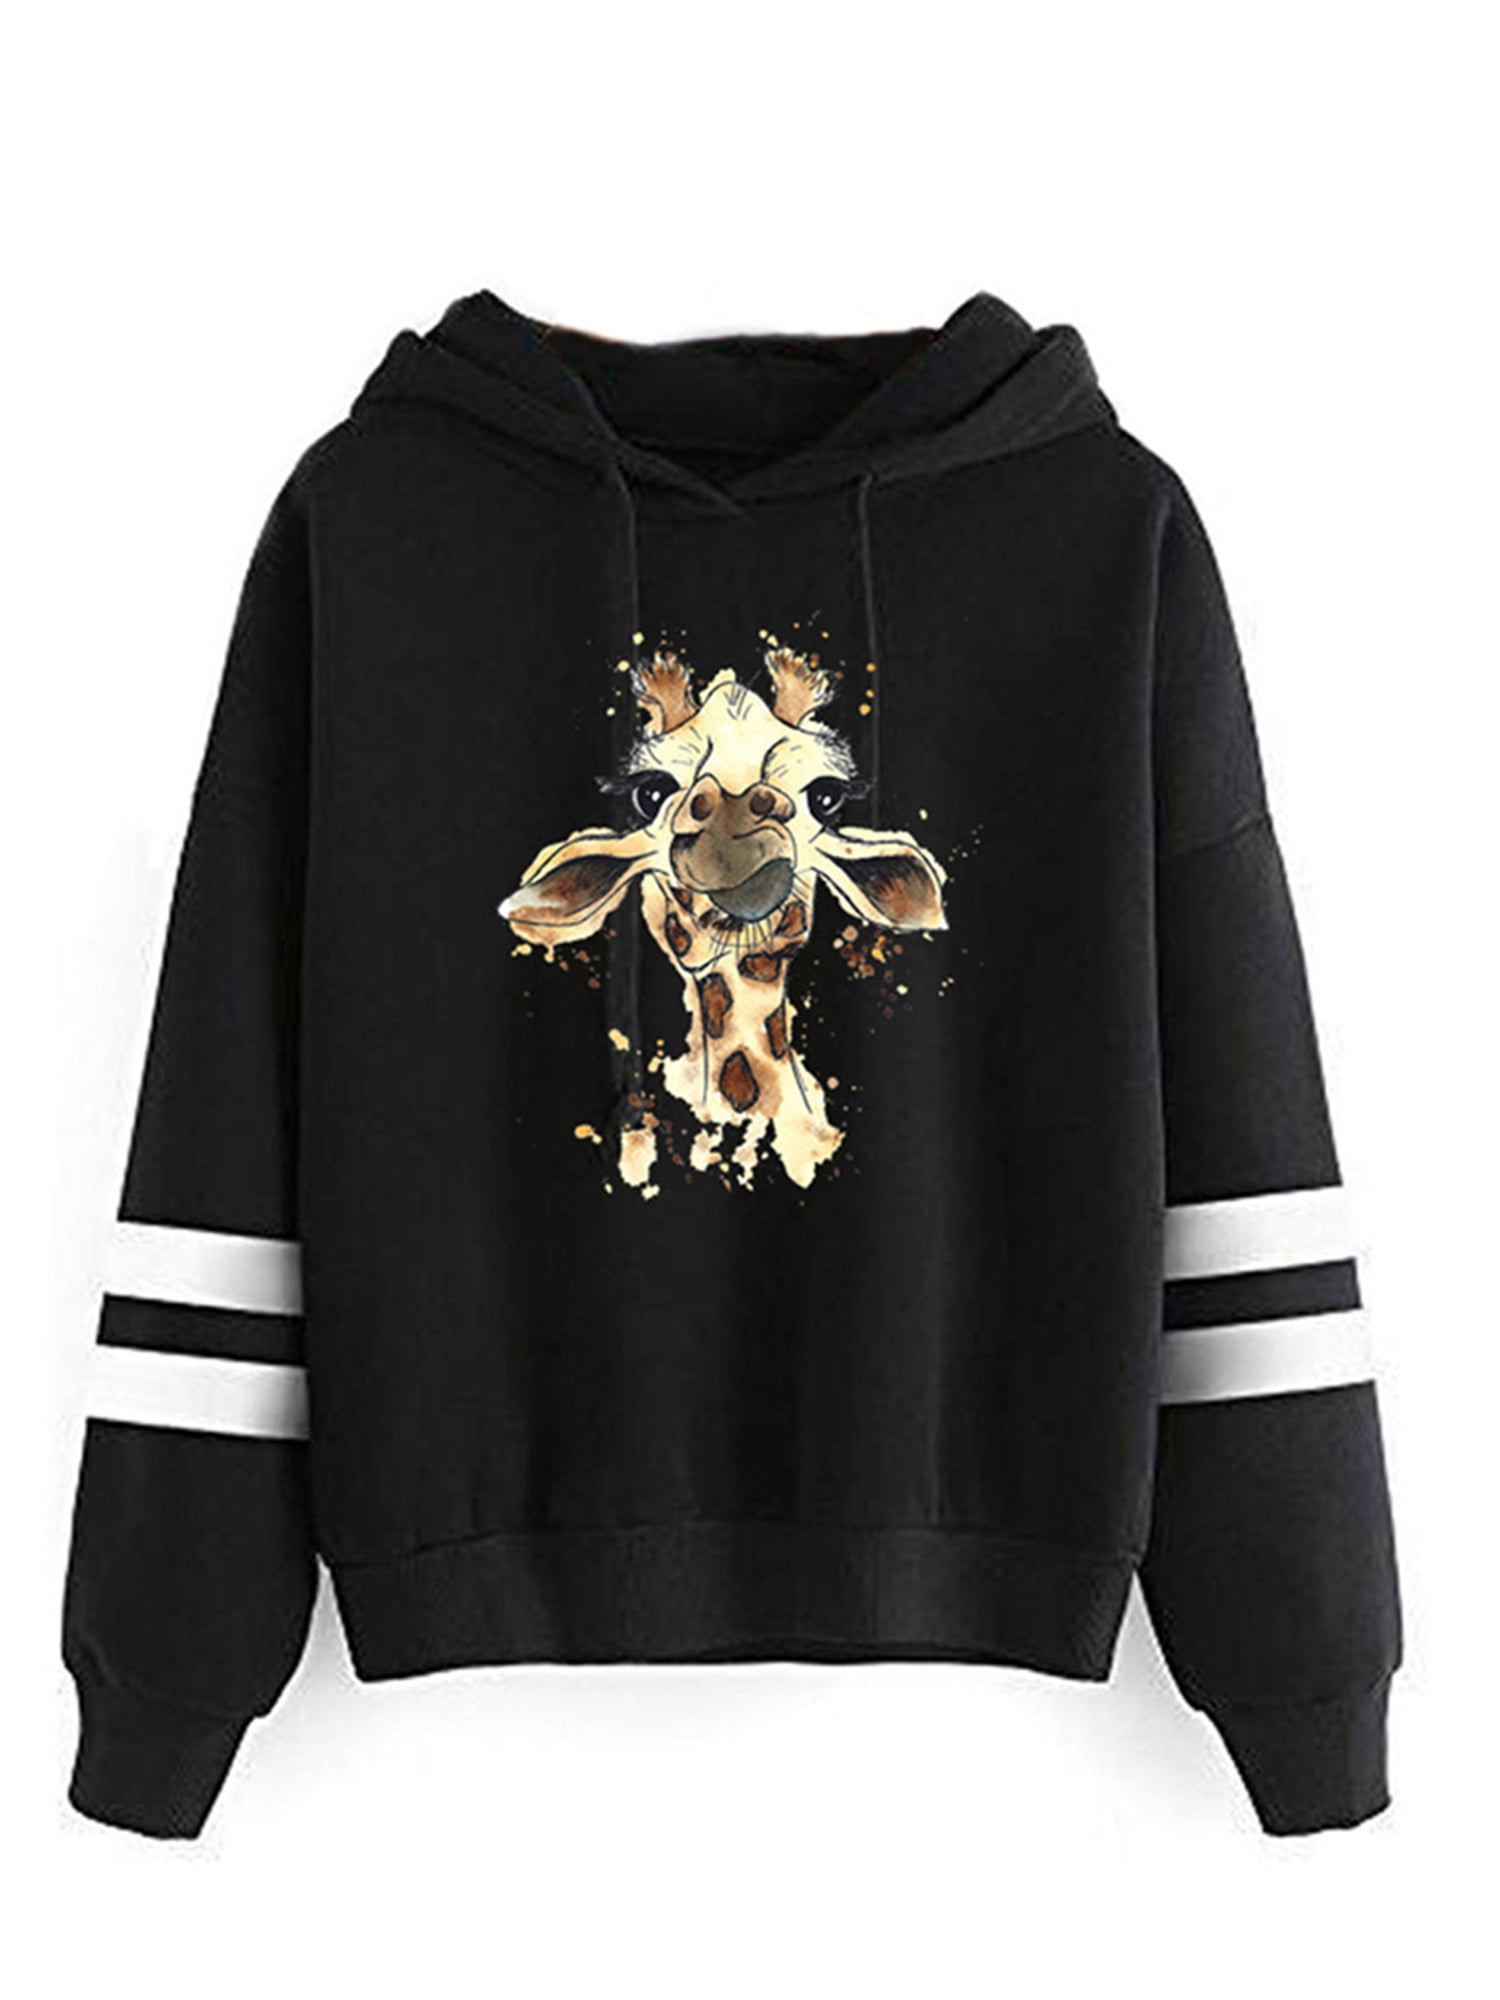 Animals hoodie hooded quality hoodie quality unisex winter cloth